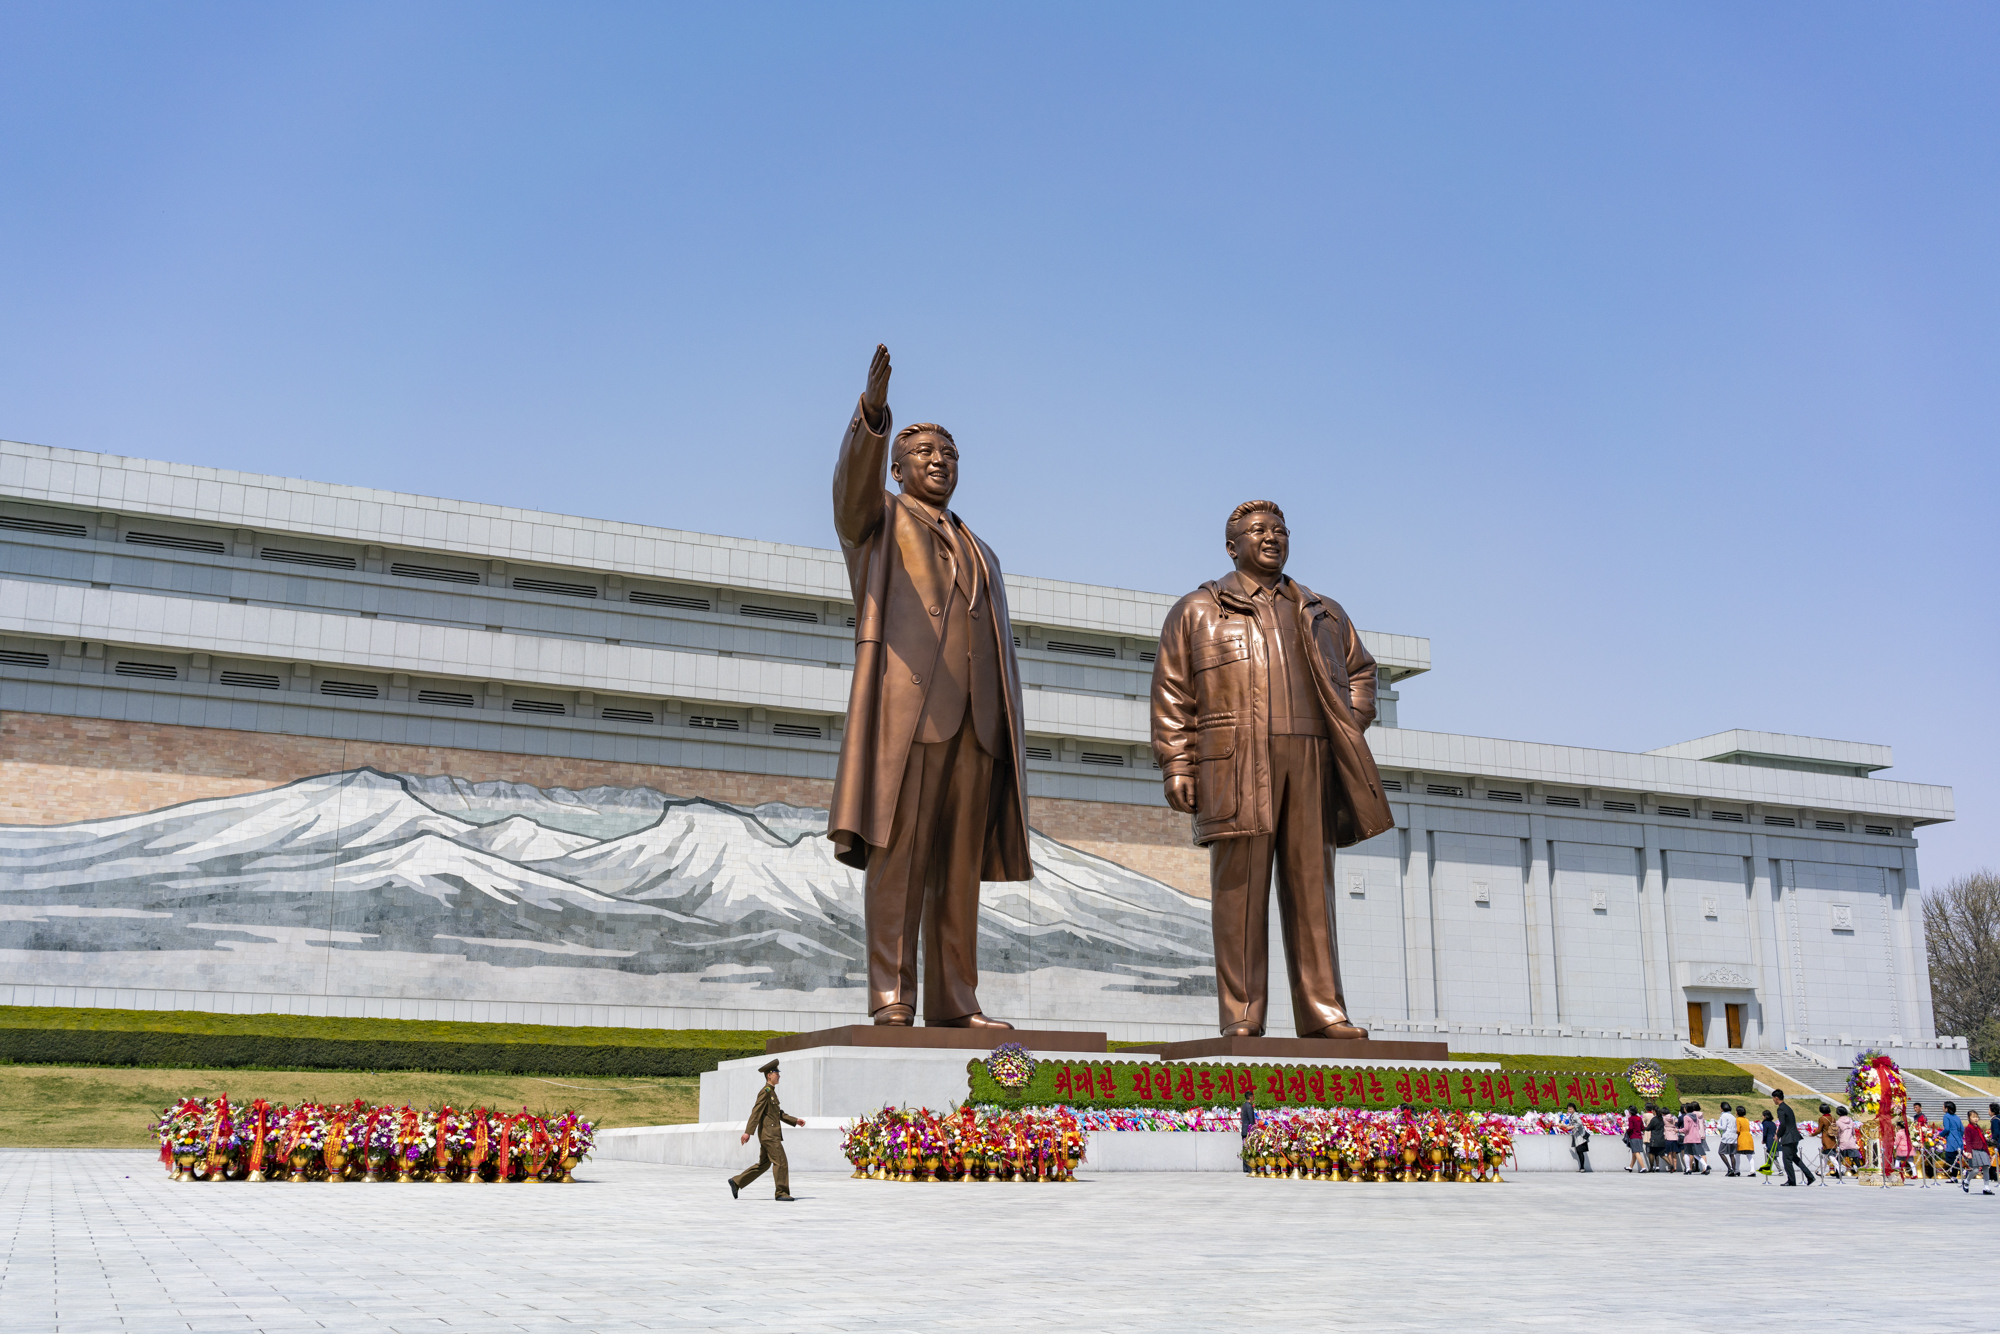  A North Korean soldier walks in front of the bronze statues of former North Korean leader Kim Il Sung and Kim Jong Il in Mansu Hill, Pyongyang, while citizens pay tribute bringing flowers on the birthday anniversary of the Eternal Leader. 